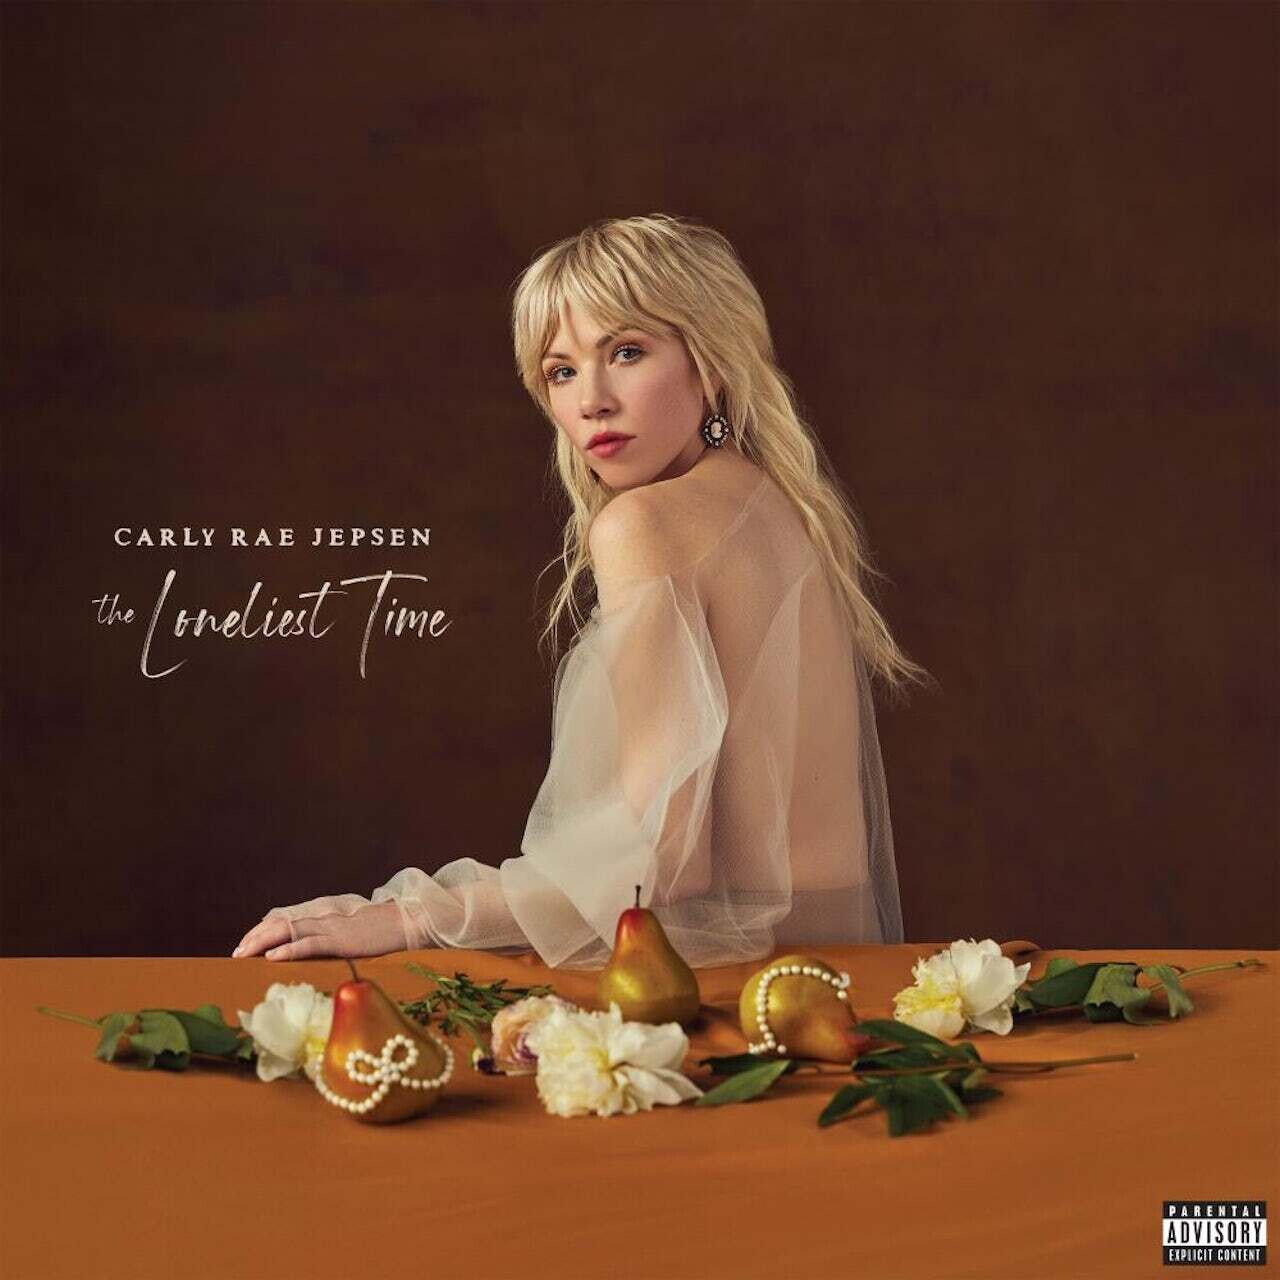 Carly Rae Jepsen / The Loneliest Time